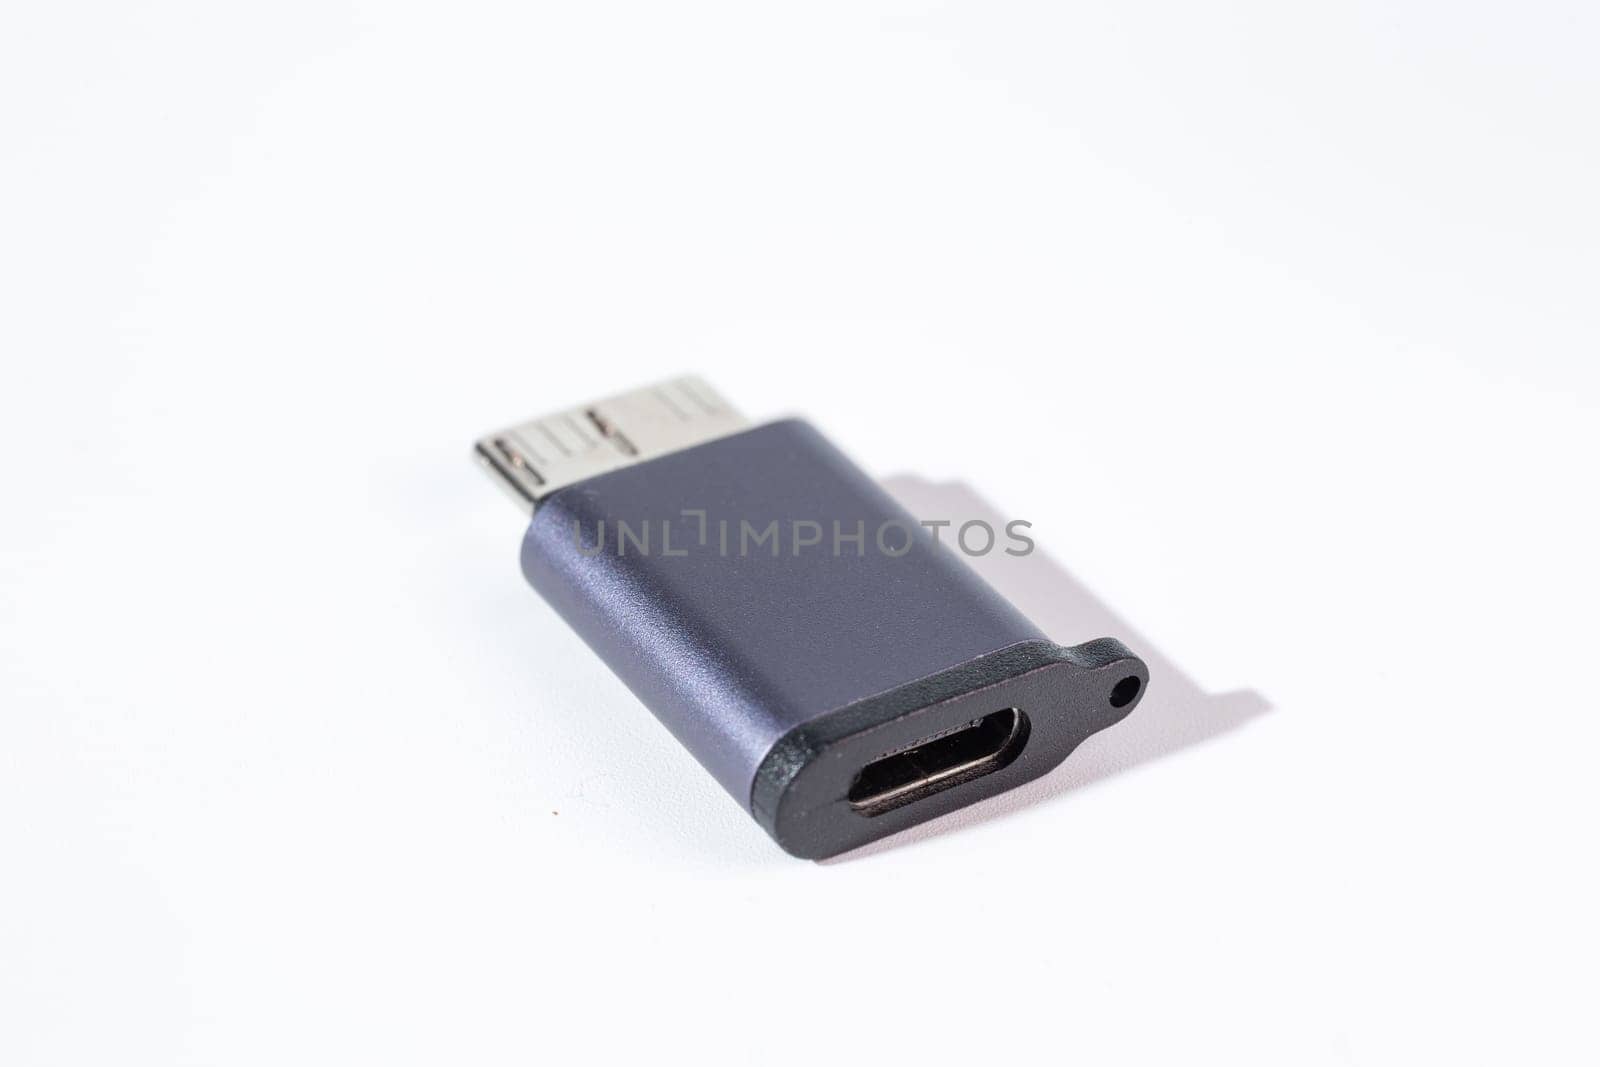 The image shows a dark grey USB 3.2 flash drive with a Type-C connector. The drive is isolated on a white background.